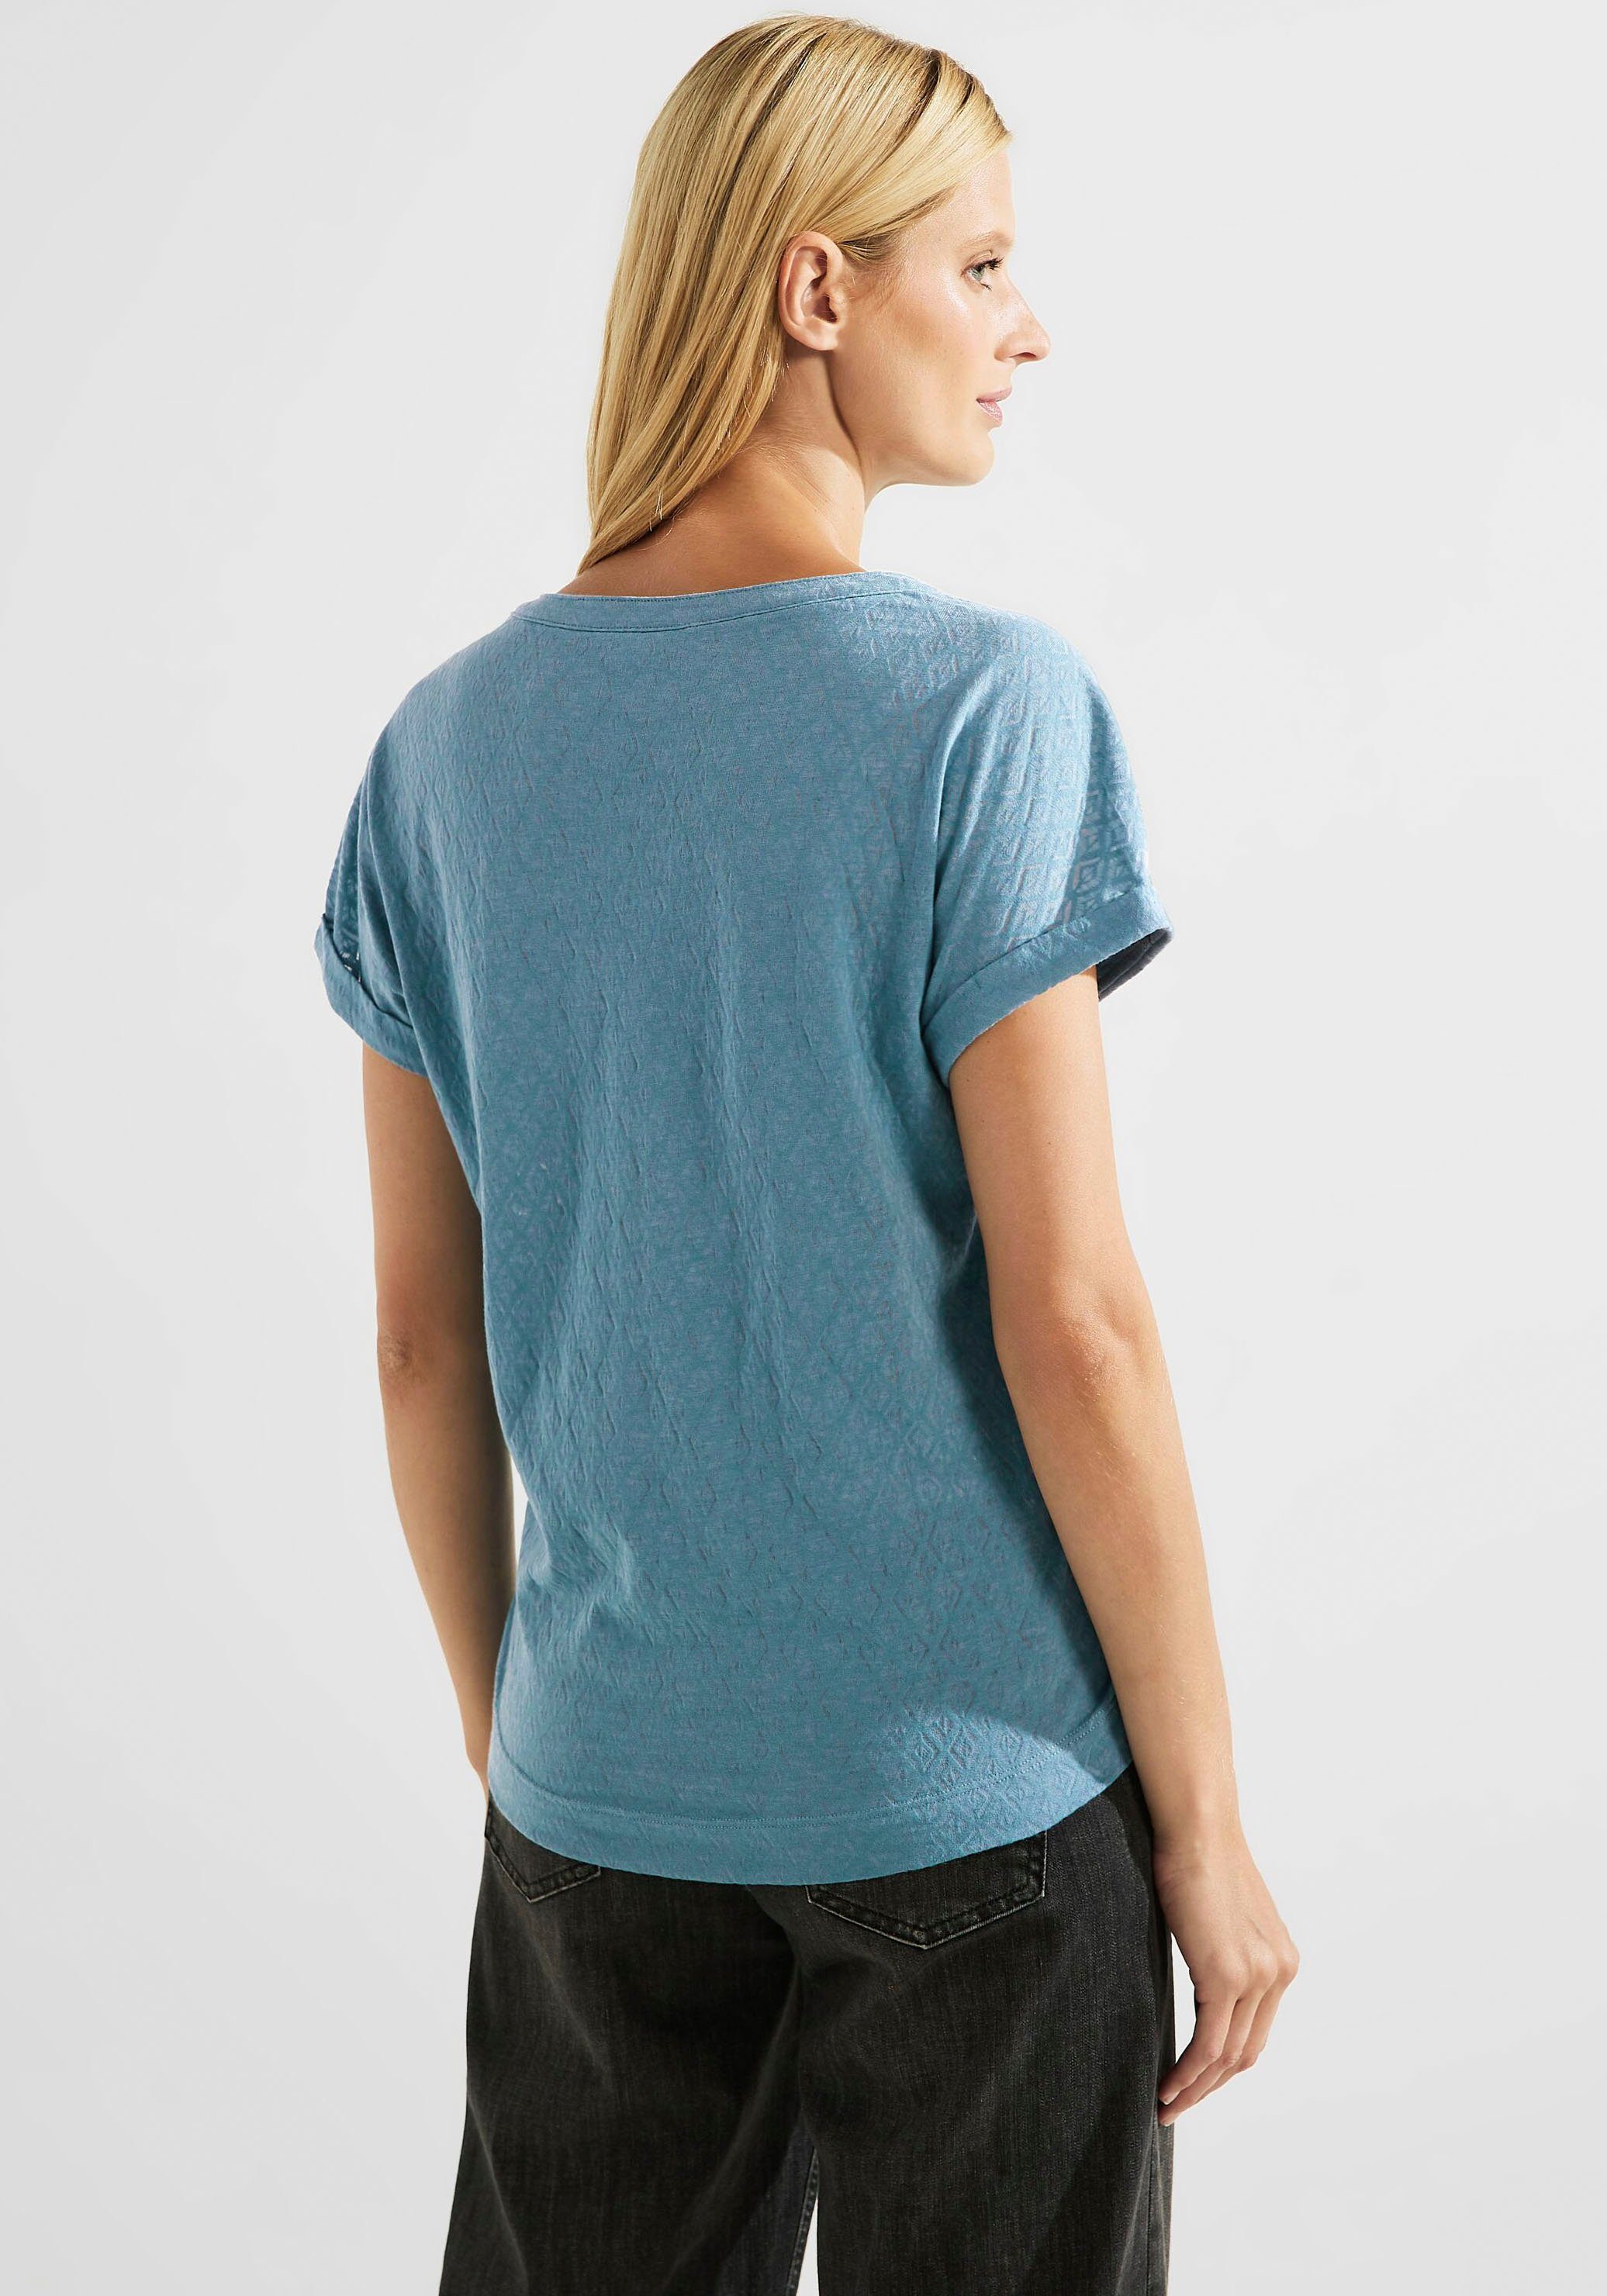 Cecil T-Shirt mit Allover-Muster blue Rhombusform adriatic in